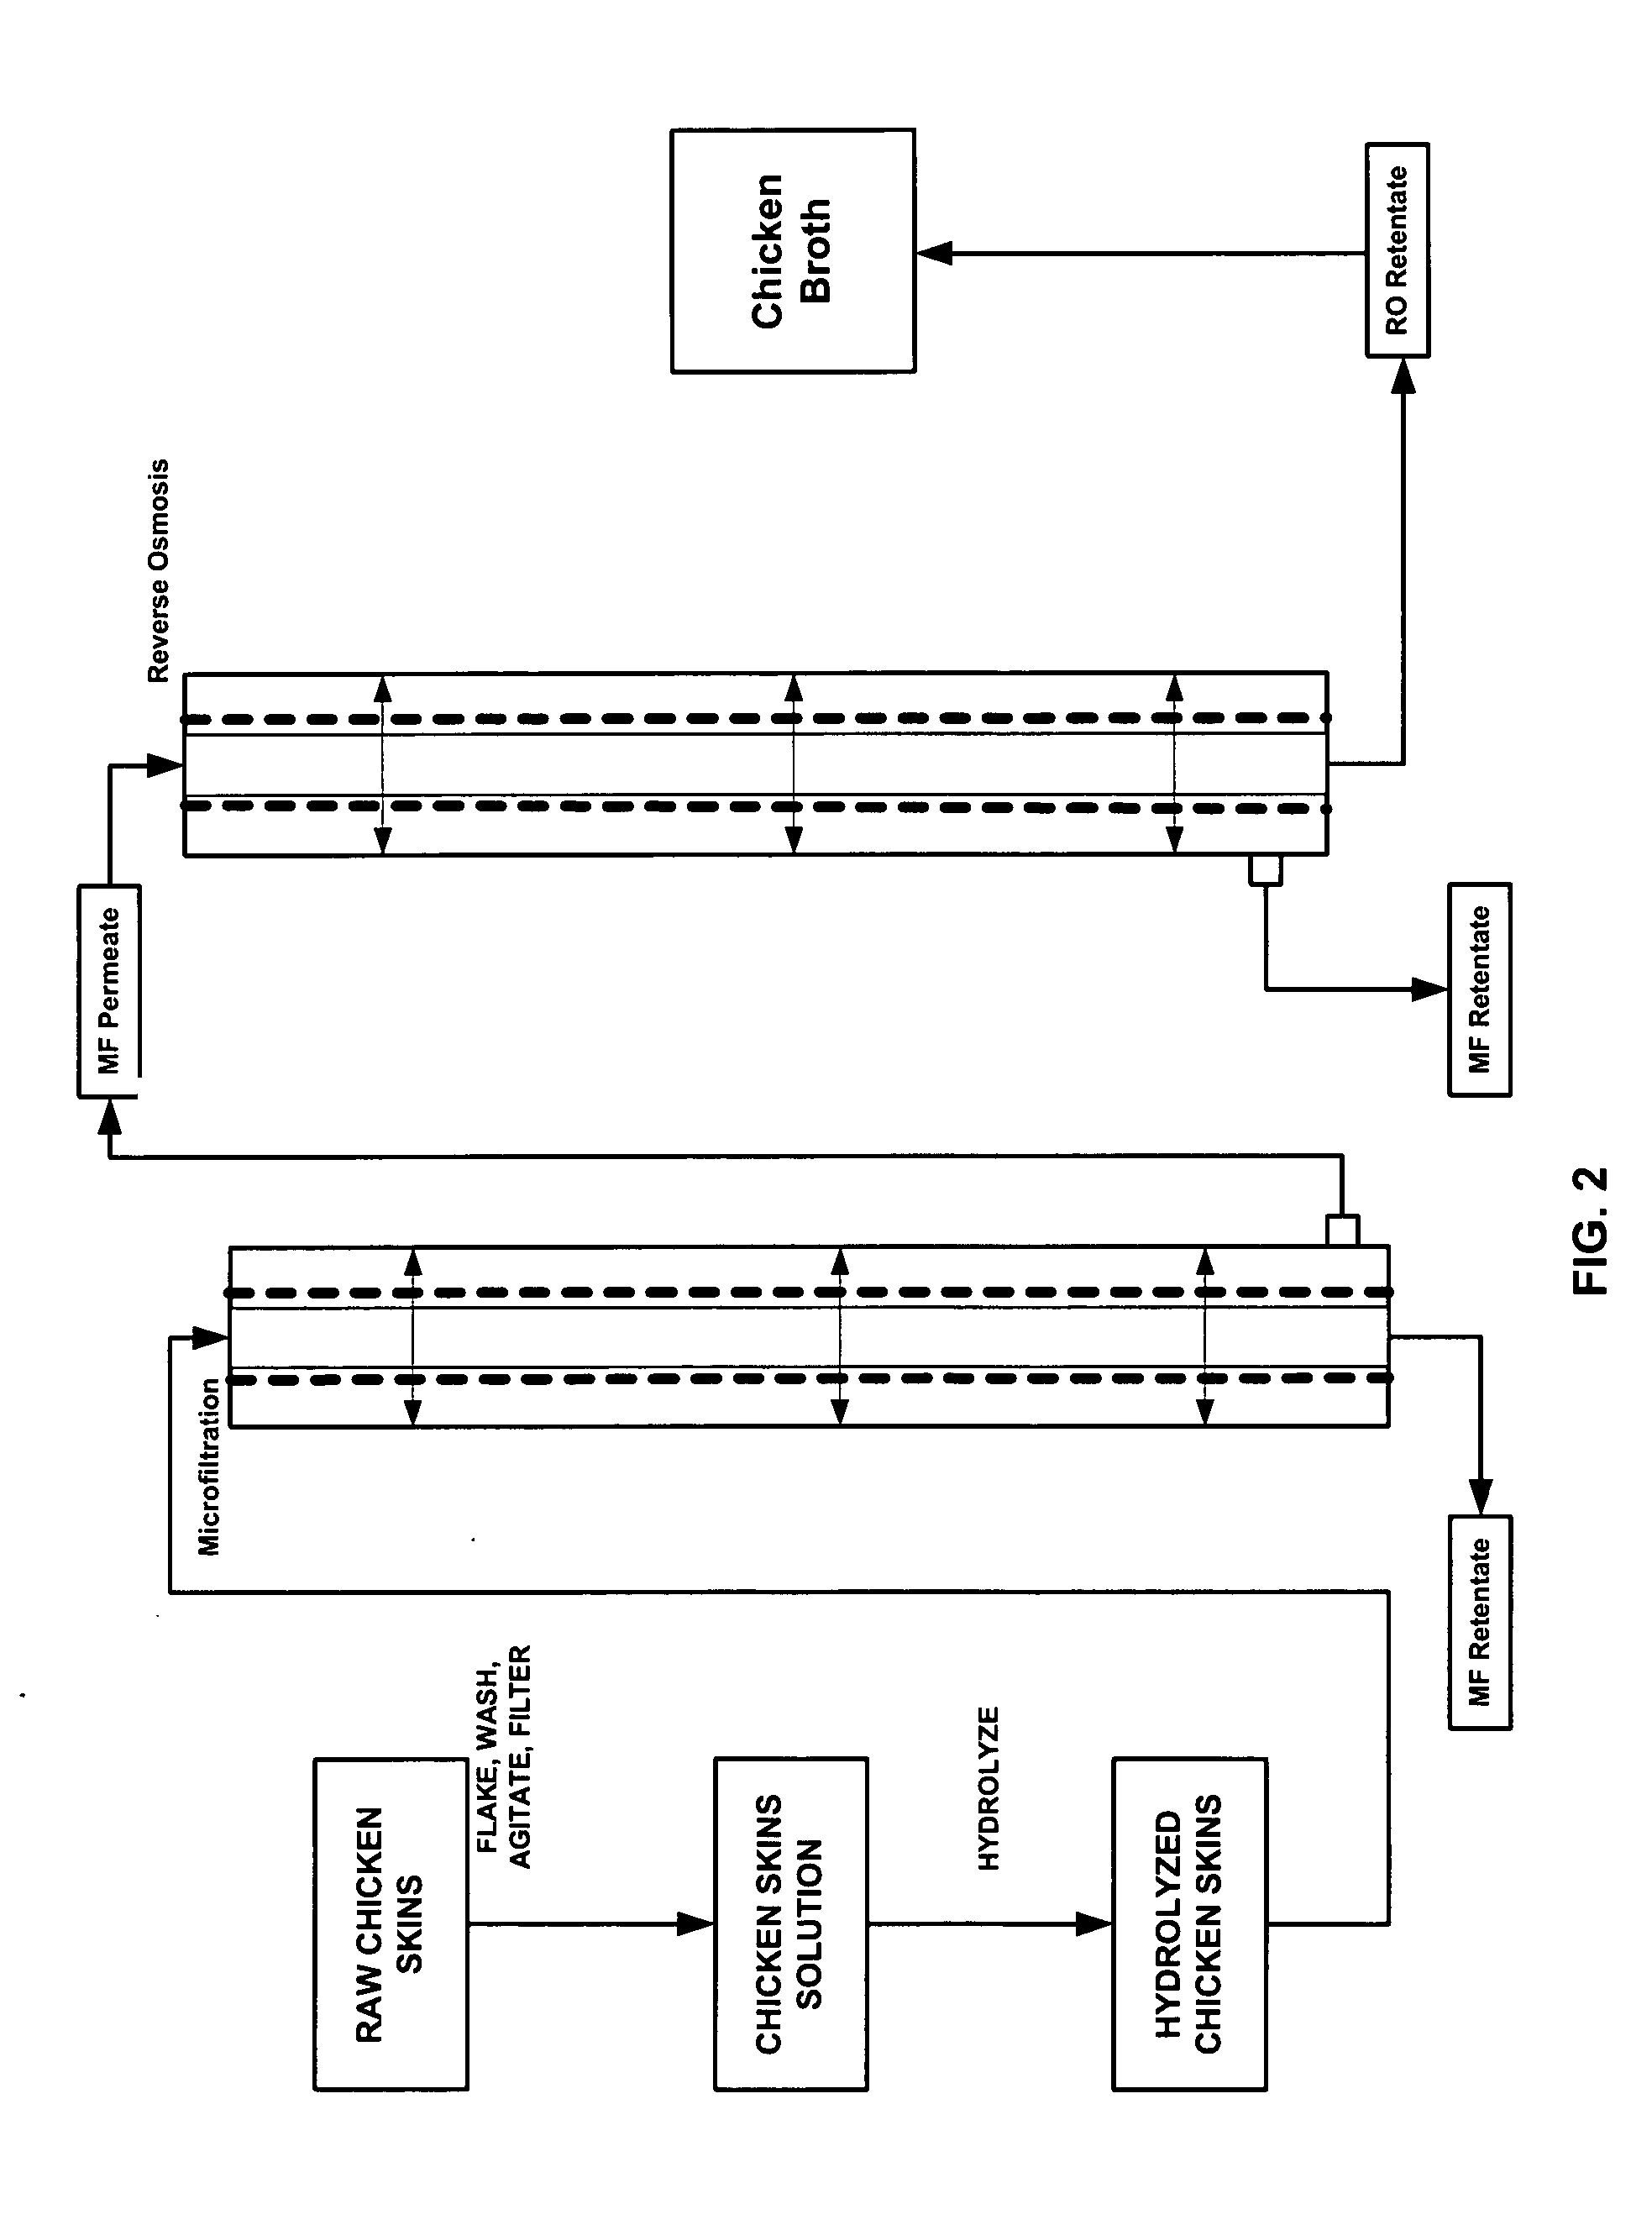 Process for producing a low fat, concentrated meat broth from meat by-products